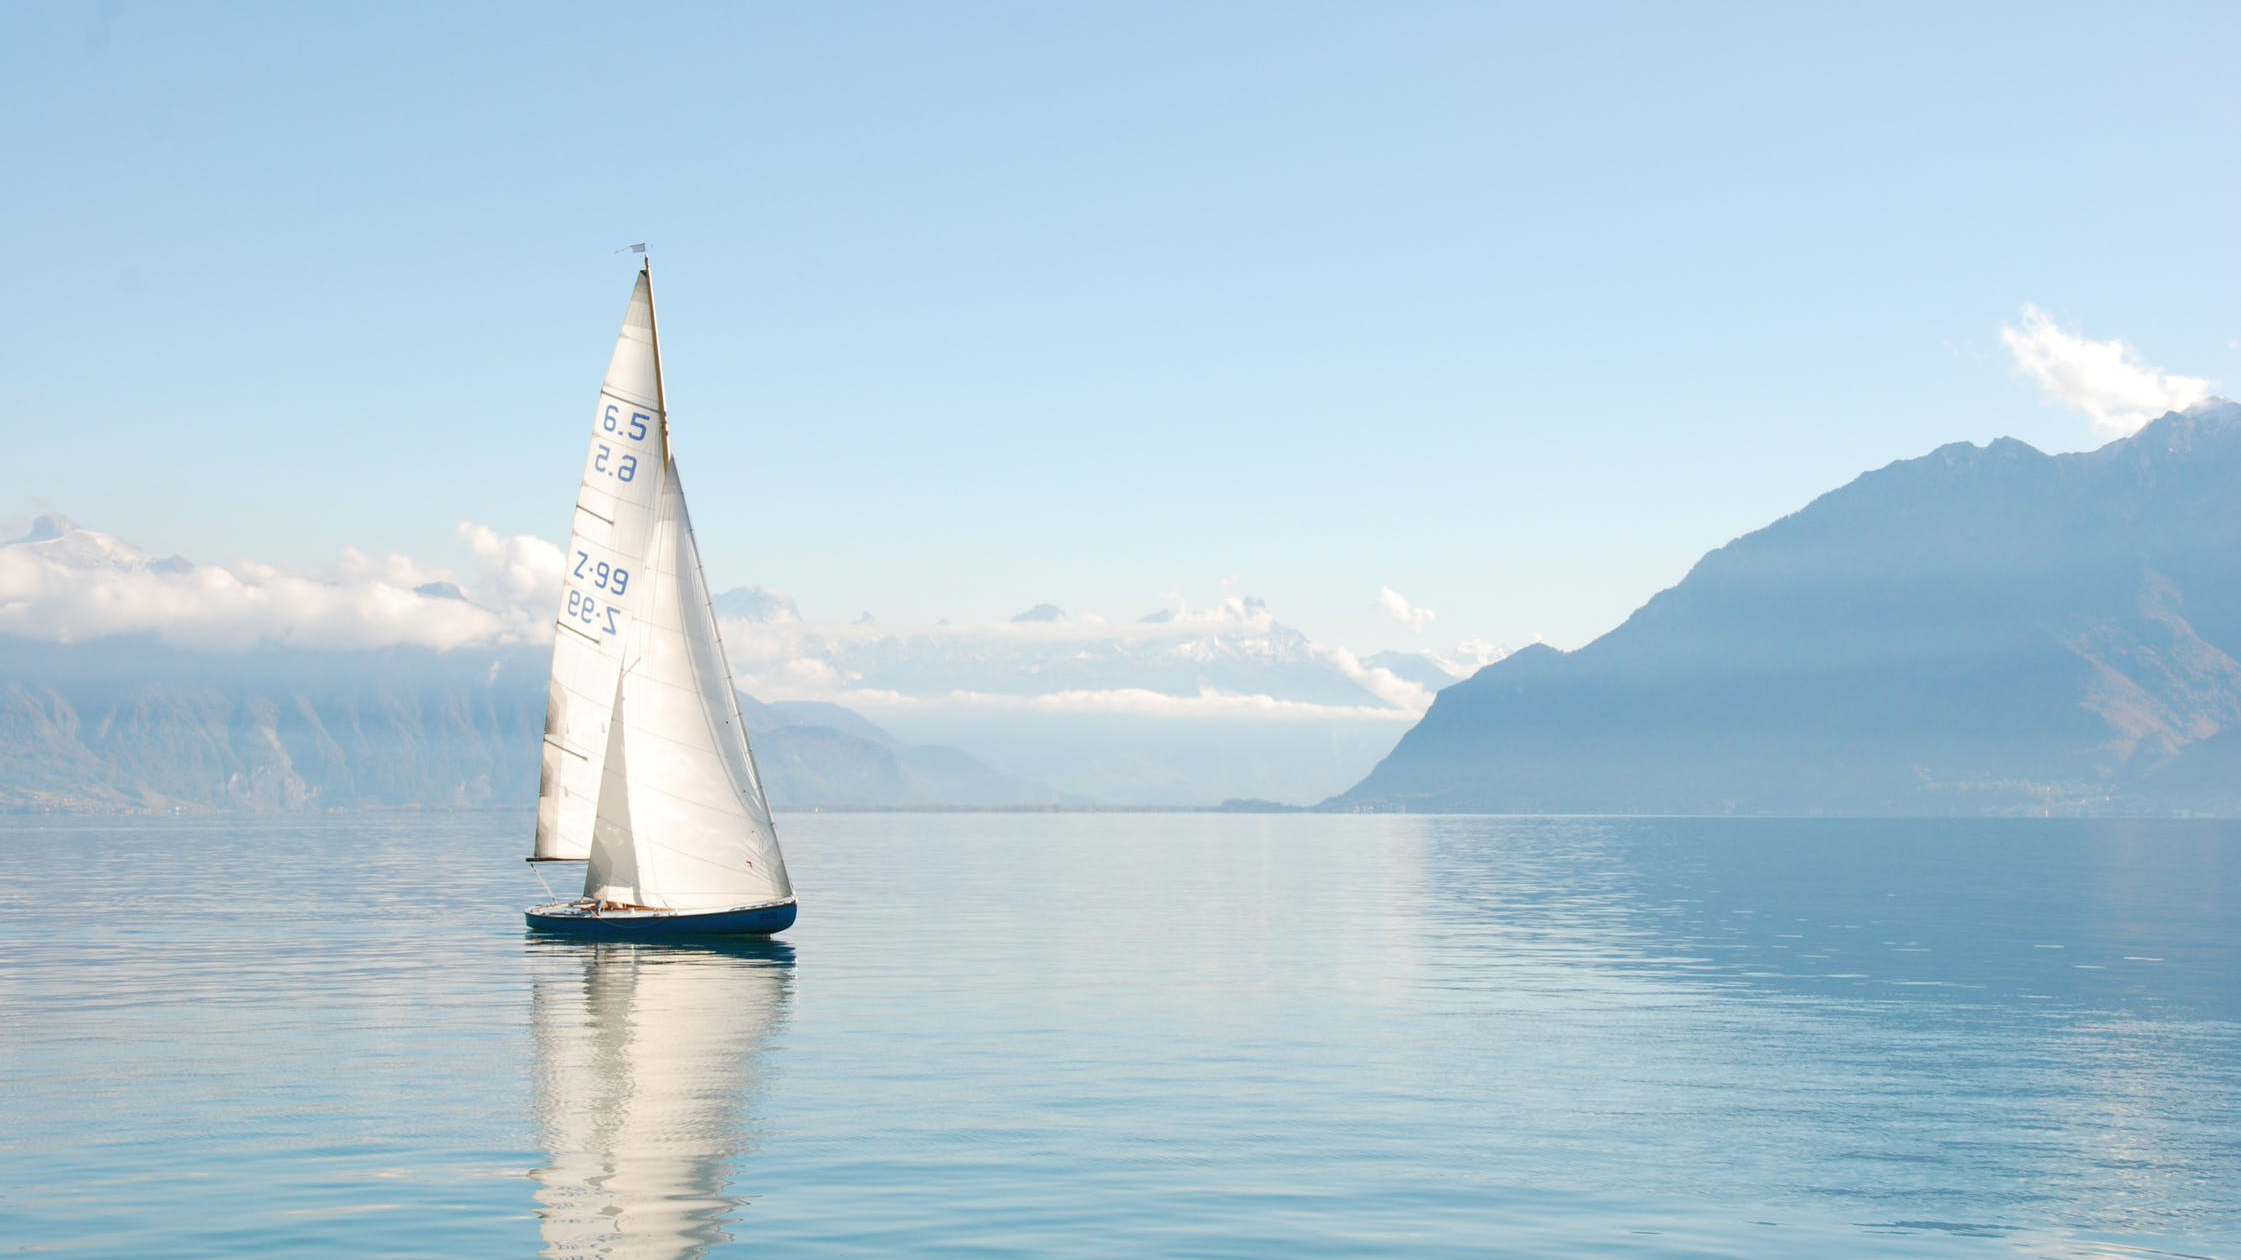 Sailboat on clear blue water in the mountains